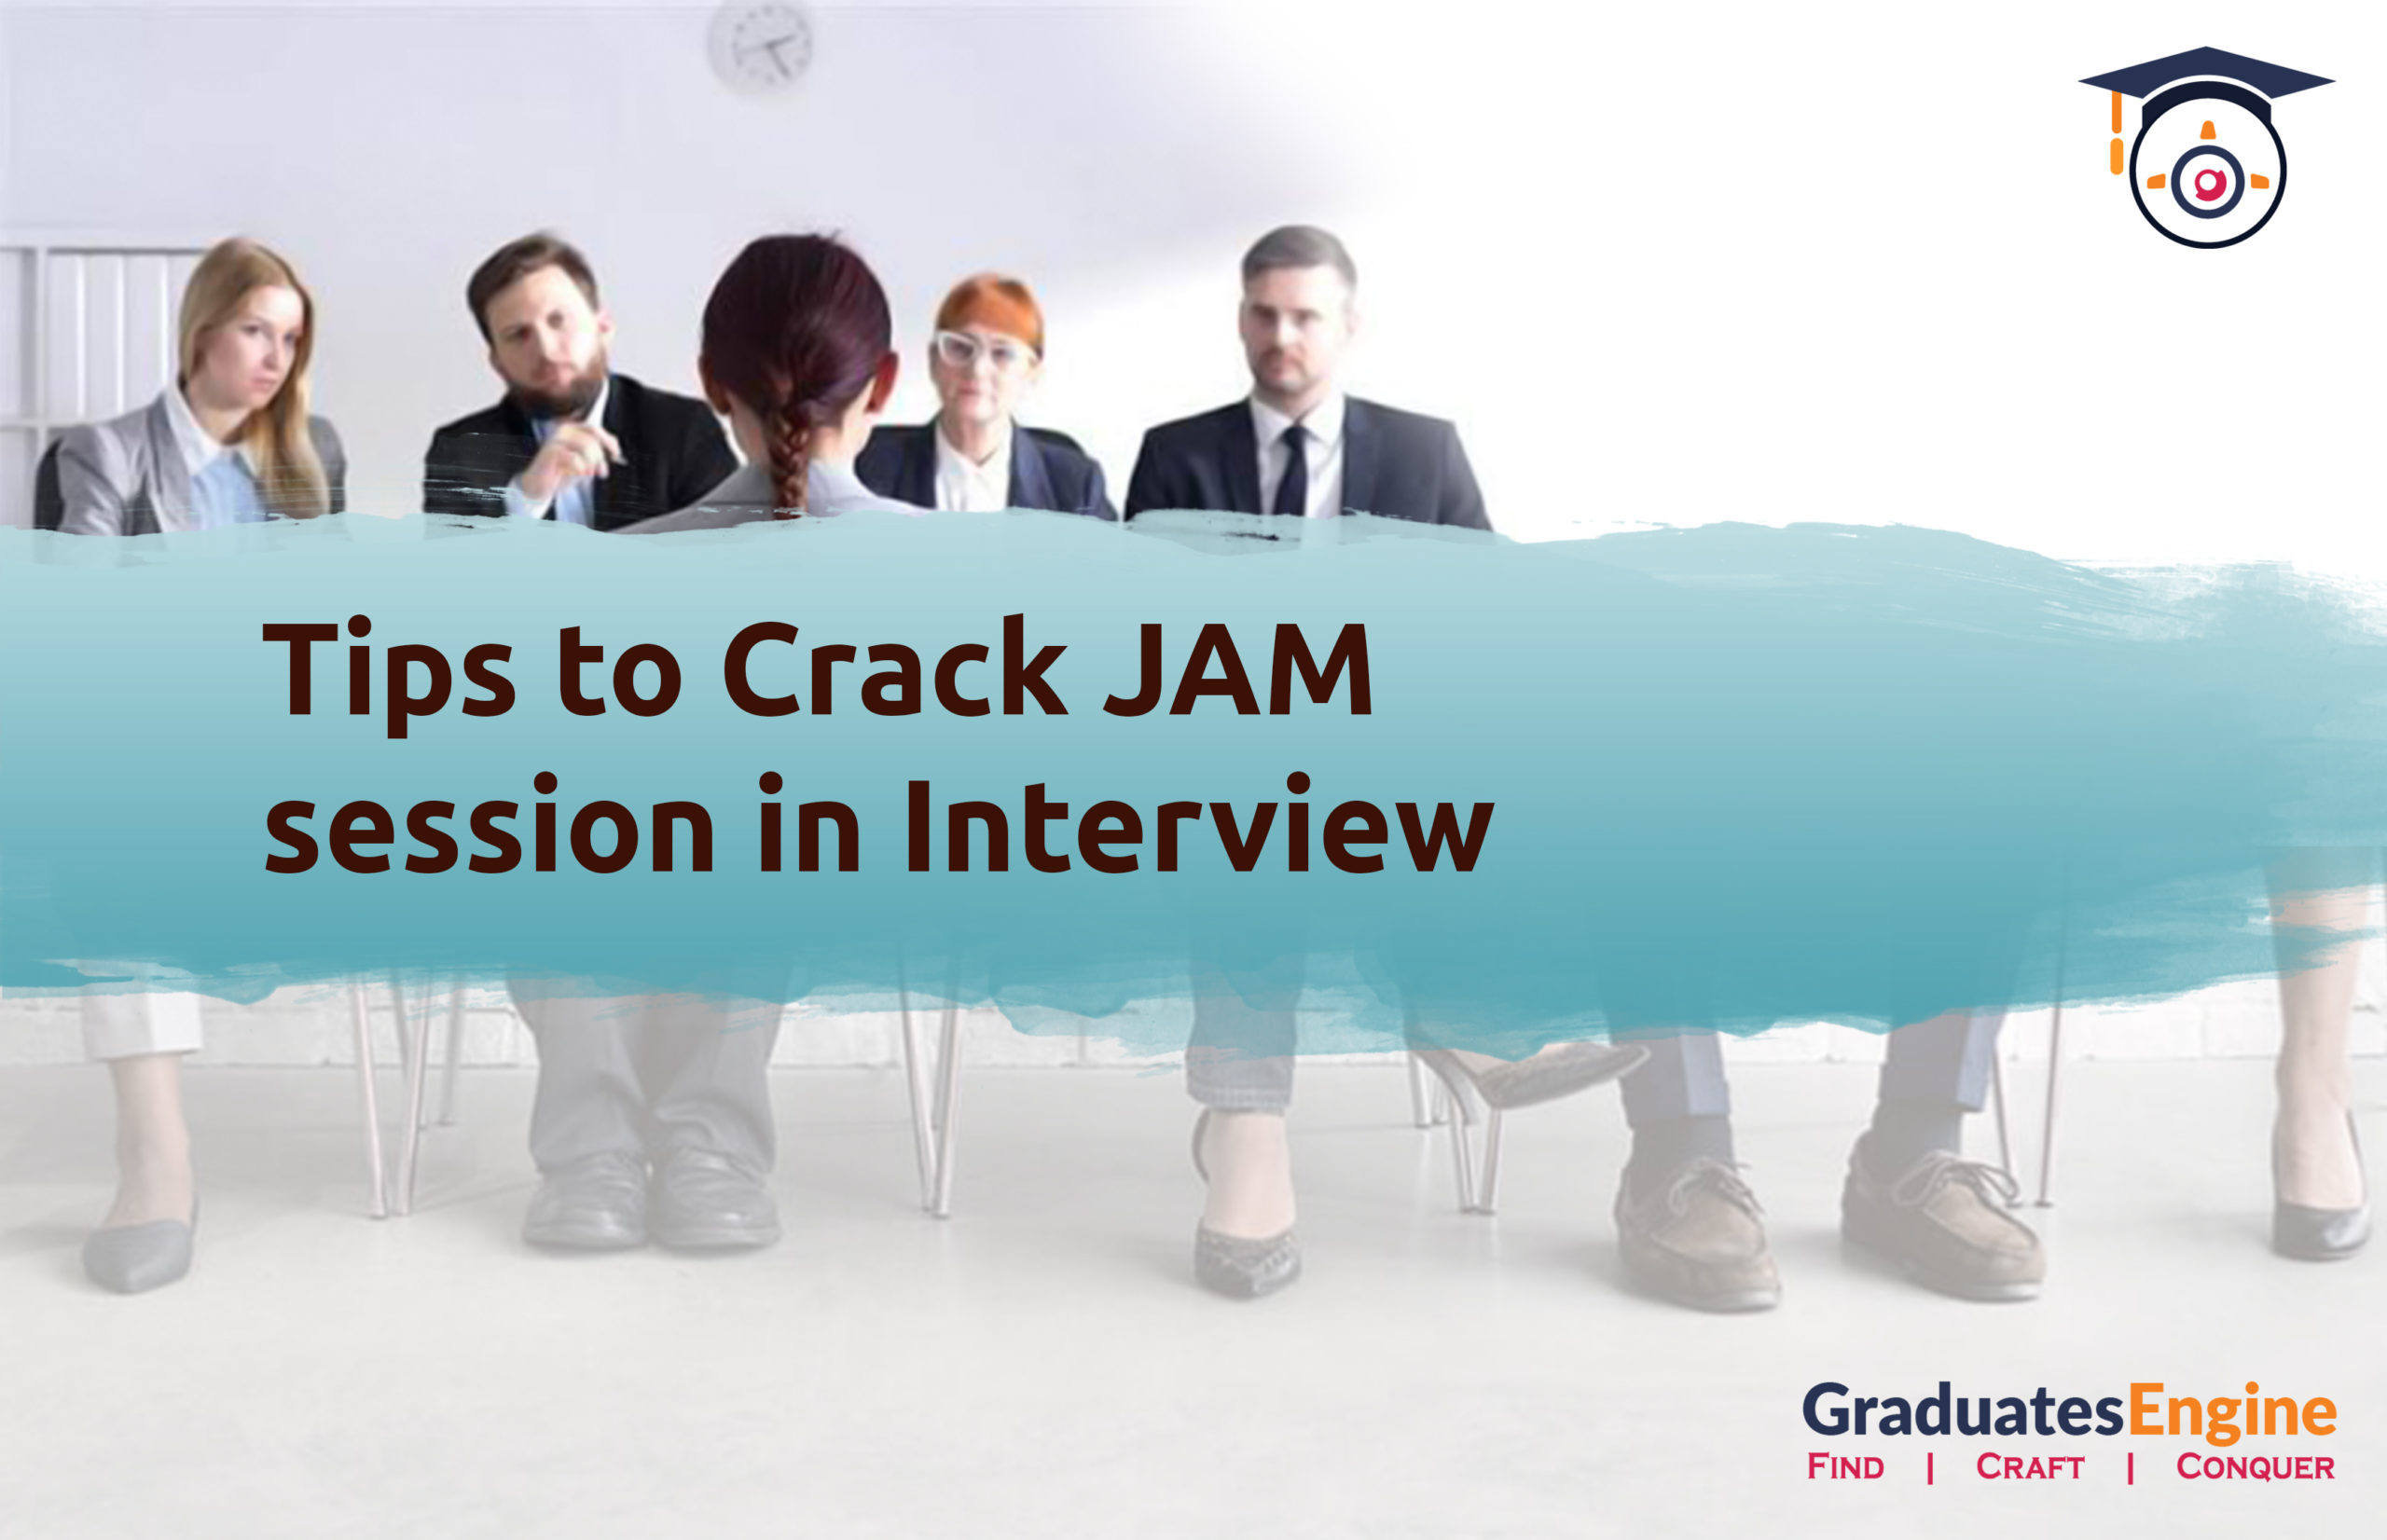 Tips to Crack JAM session in interview